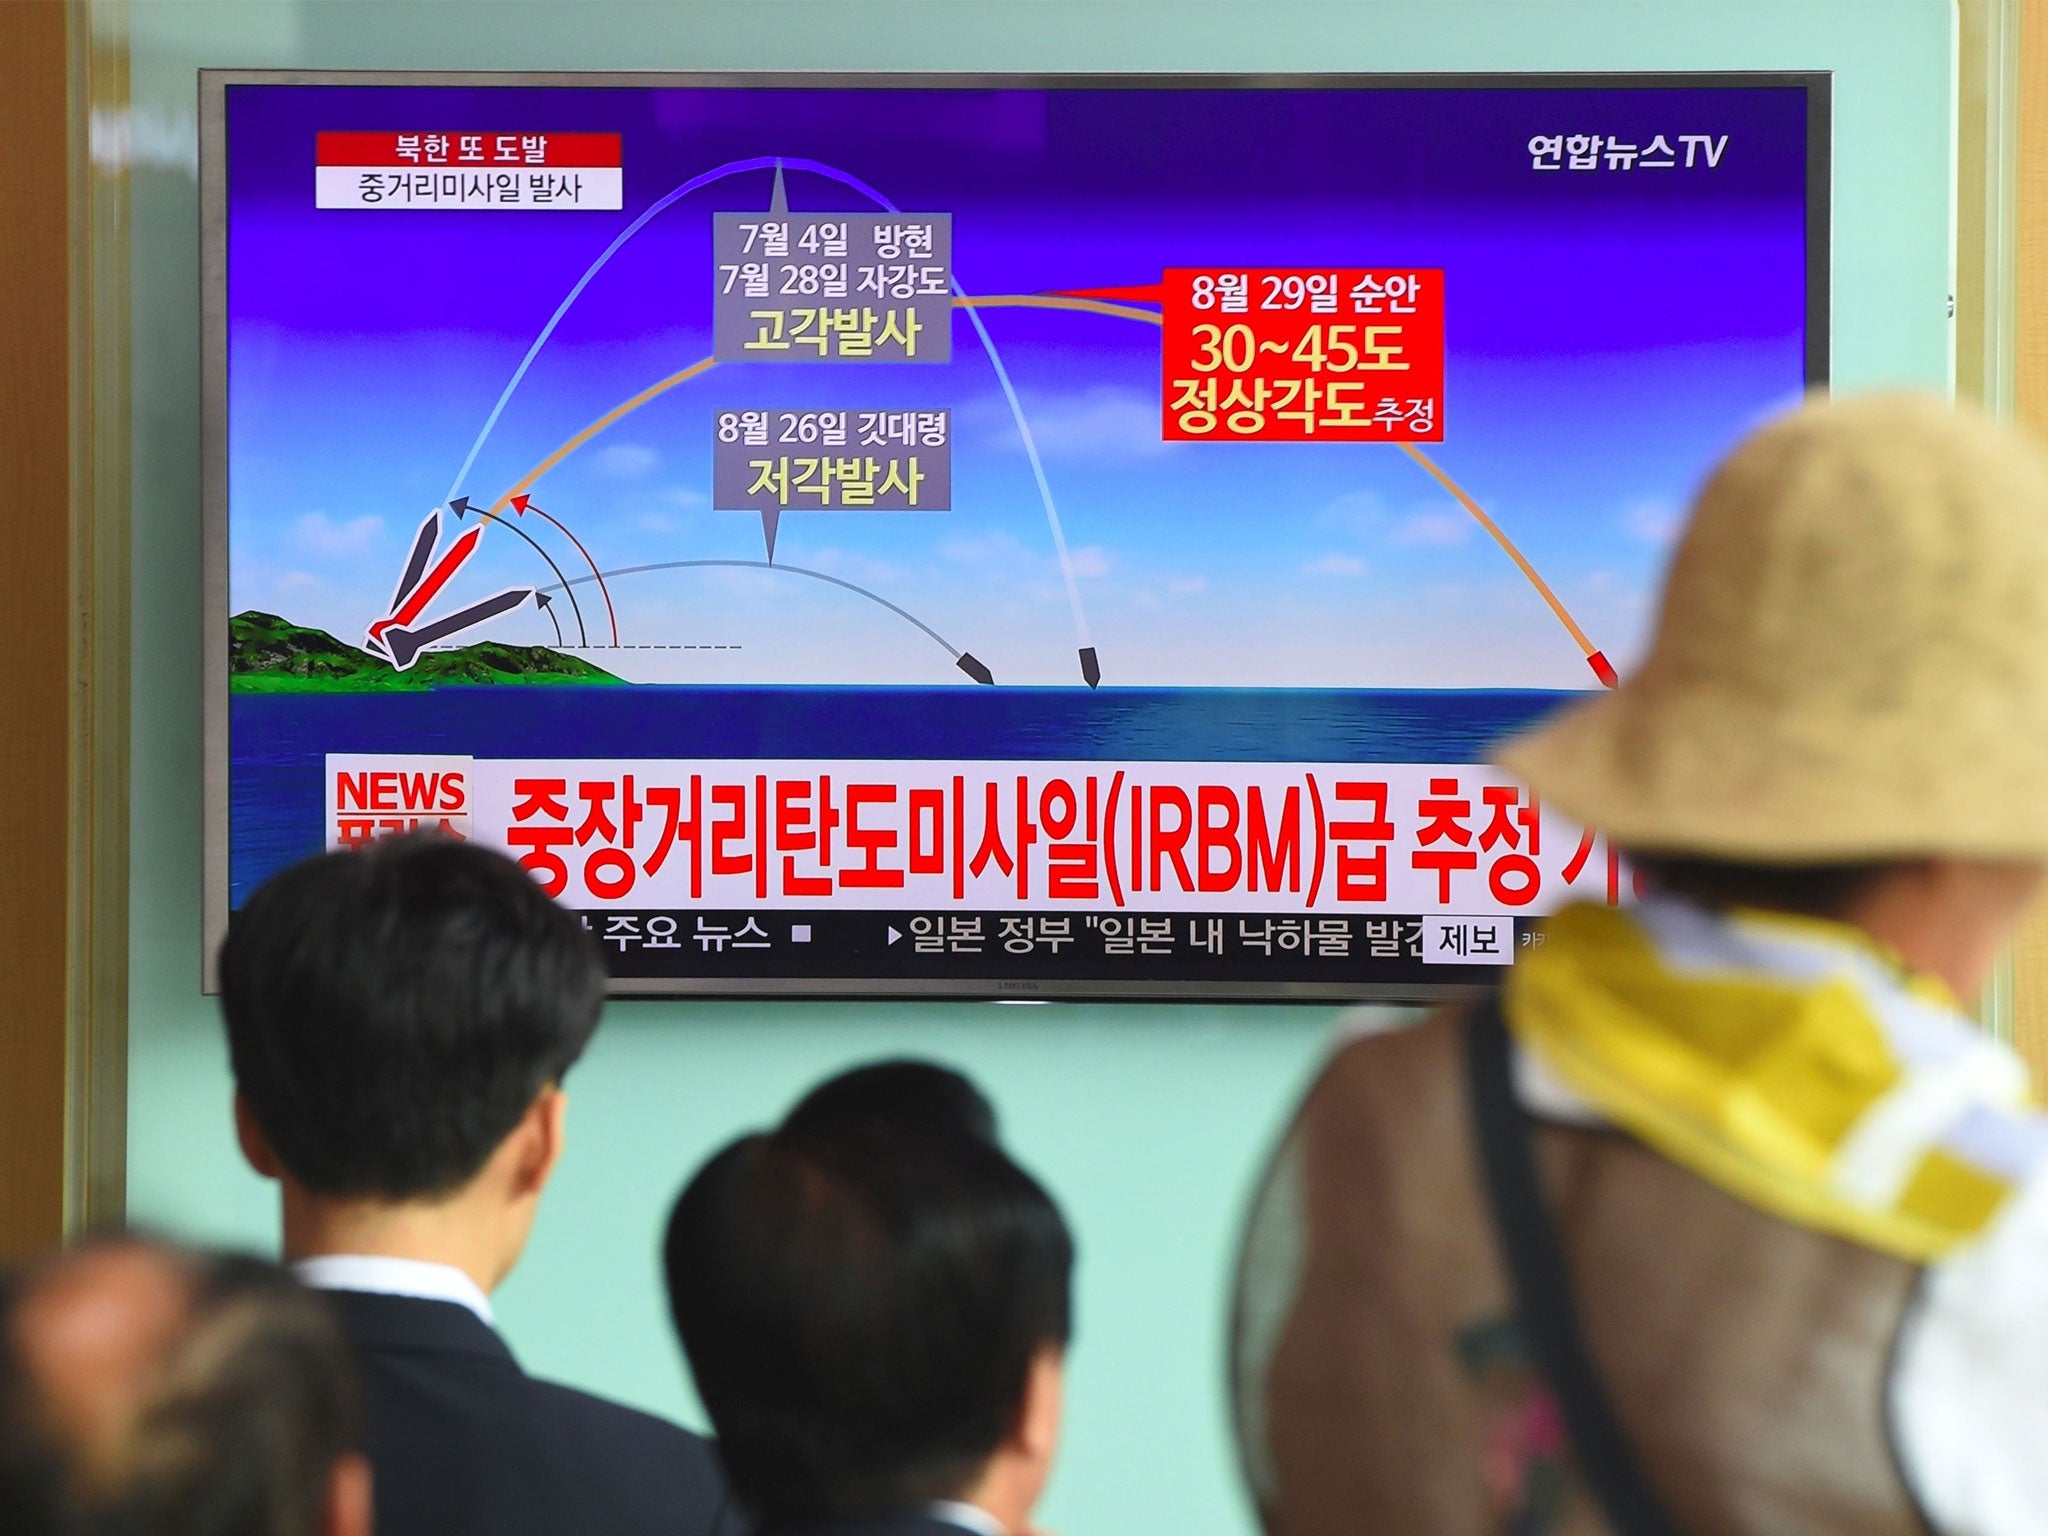 People watch a television news screen showing a graphic of a North Korean missile launch at a station in Seoul